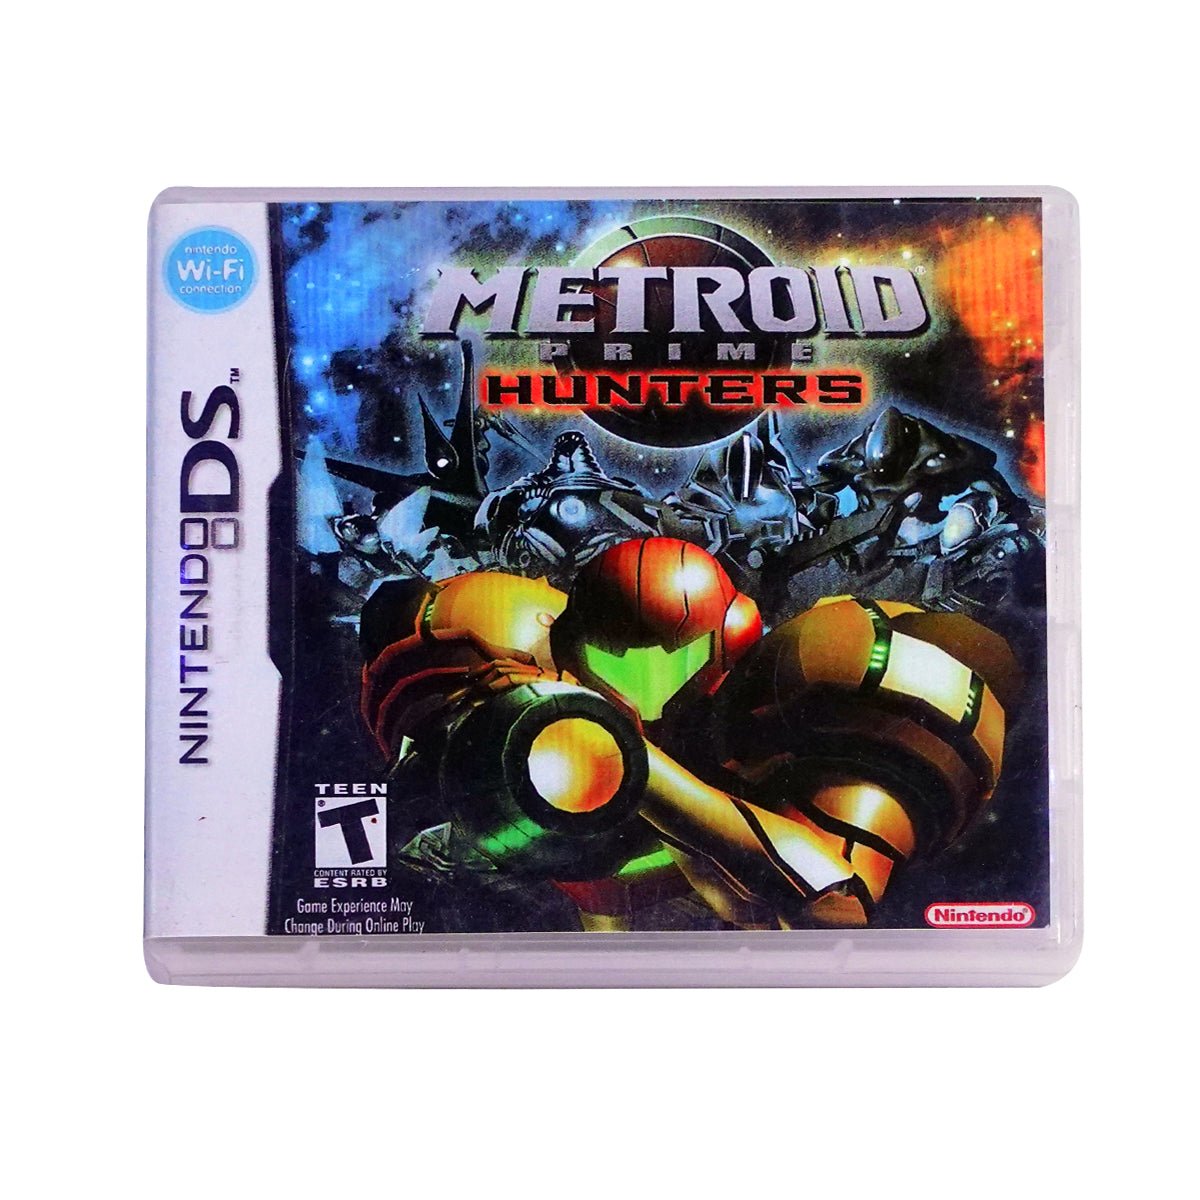 (Pre-Owned) Metroid Prime Hunters - Nintendo DS Game - ريترو - Store 974 | ستور ٩٧٤